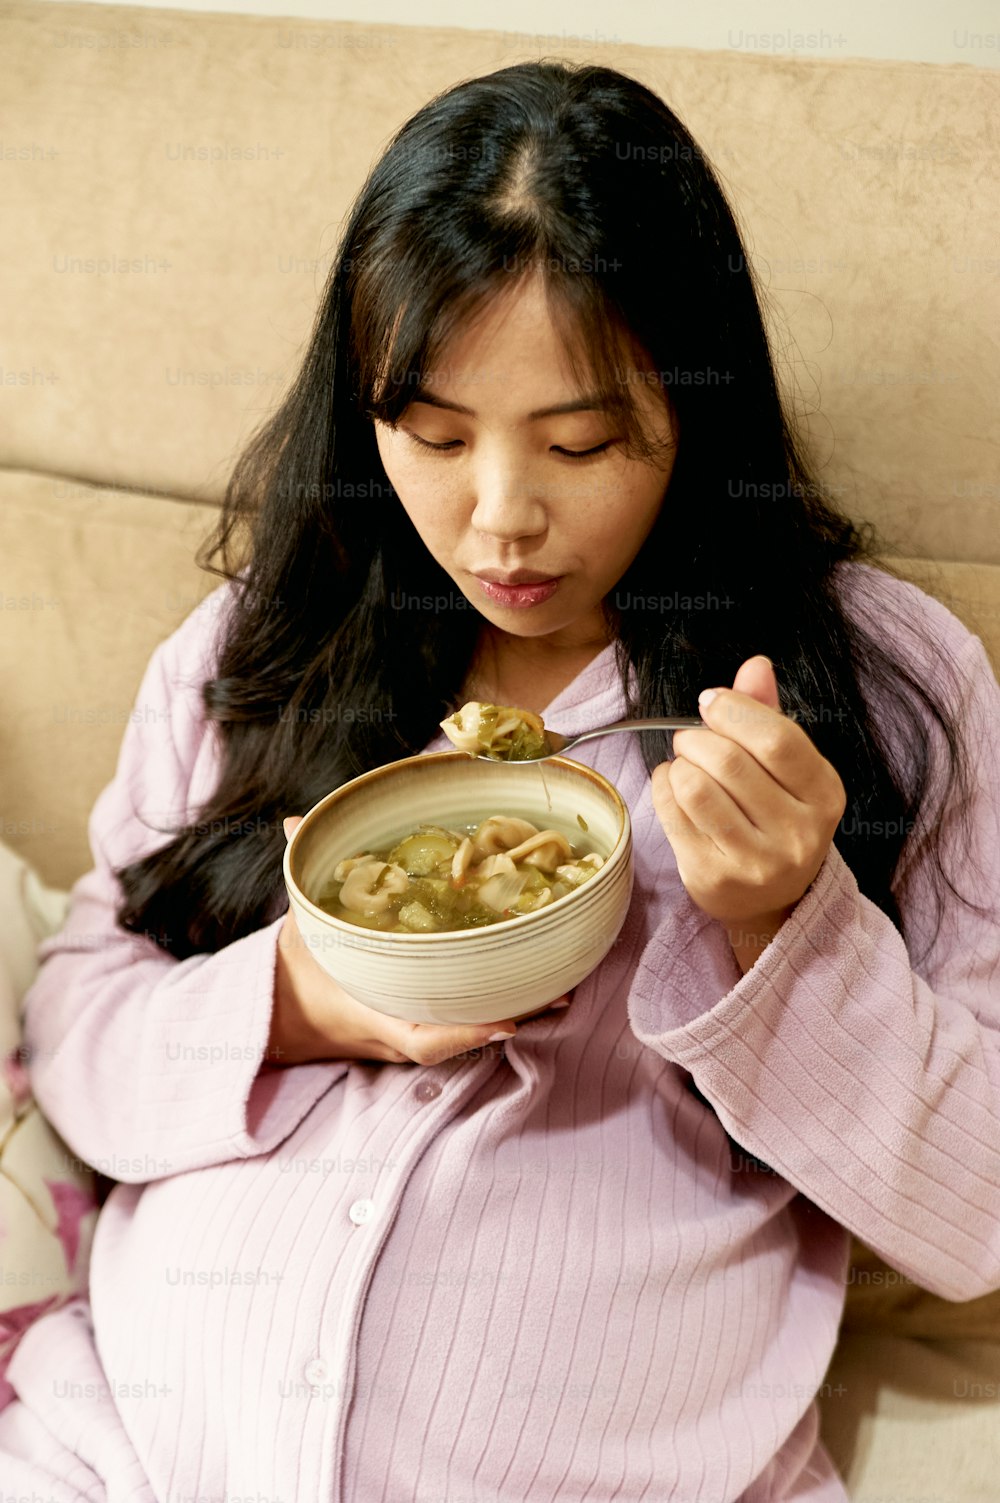 a woman sitting on a couch eating a bowl of soup